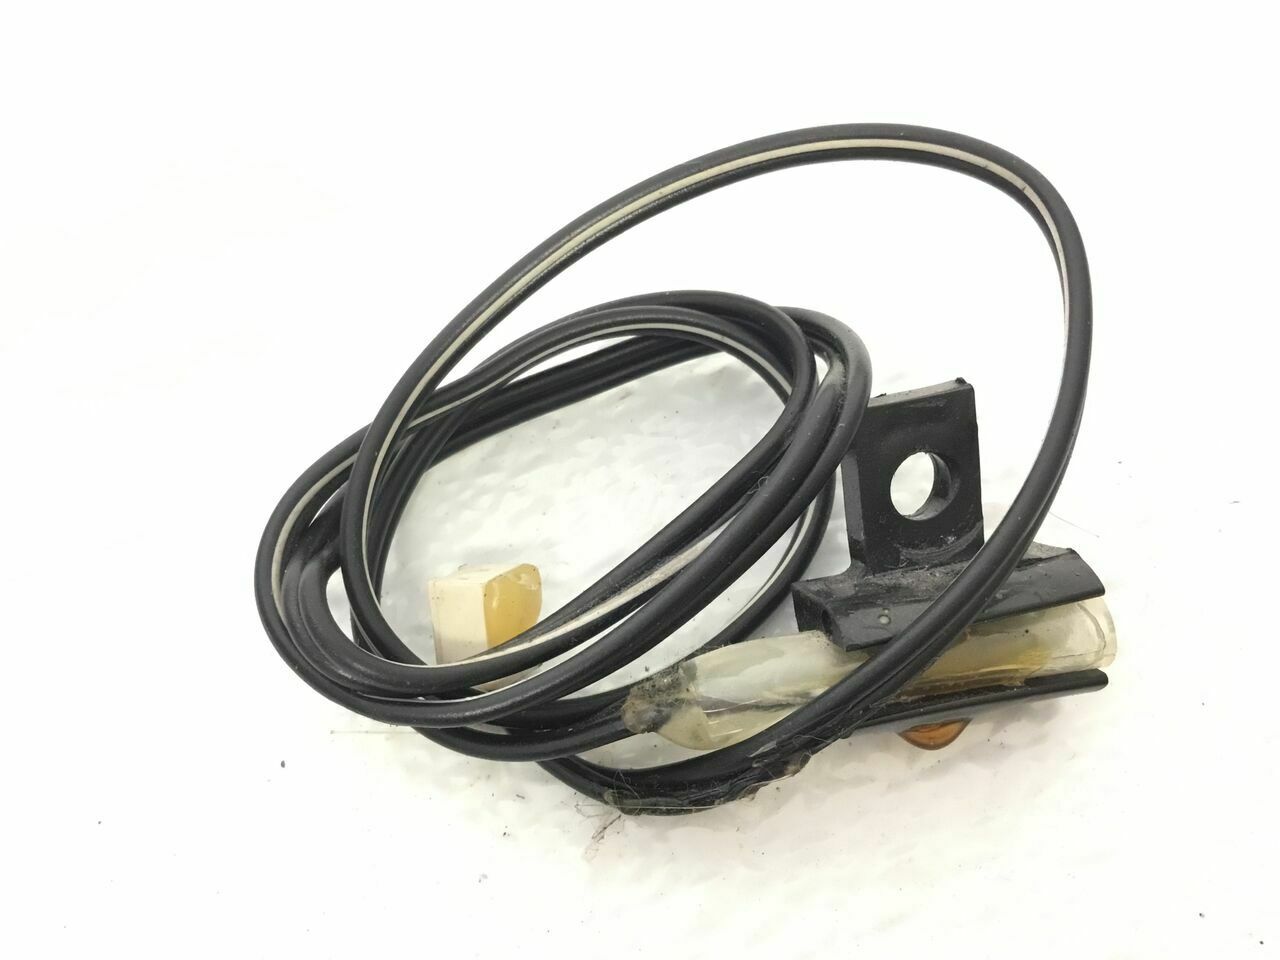 BH Elliptical RPM Speed Sensor Reed Switch Wire Harness (Used)